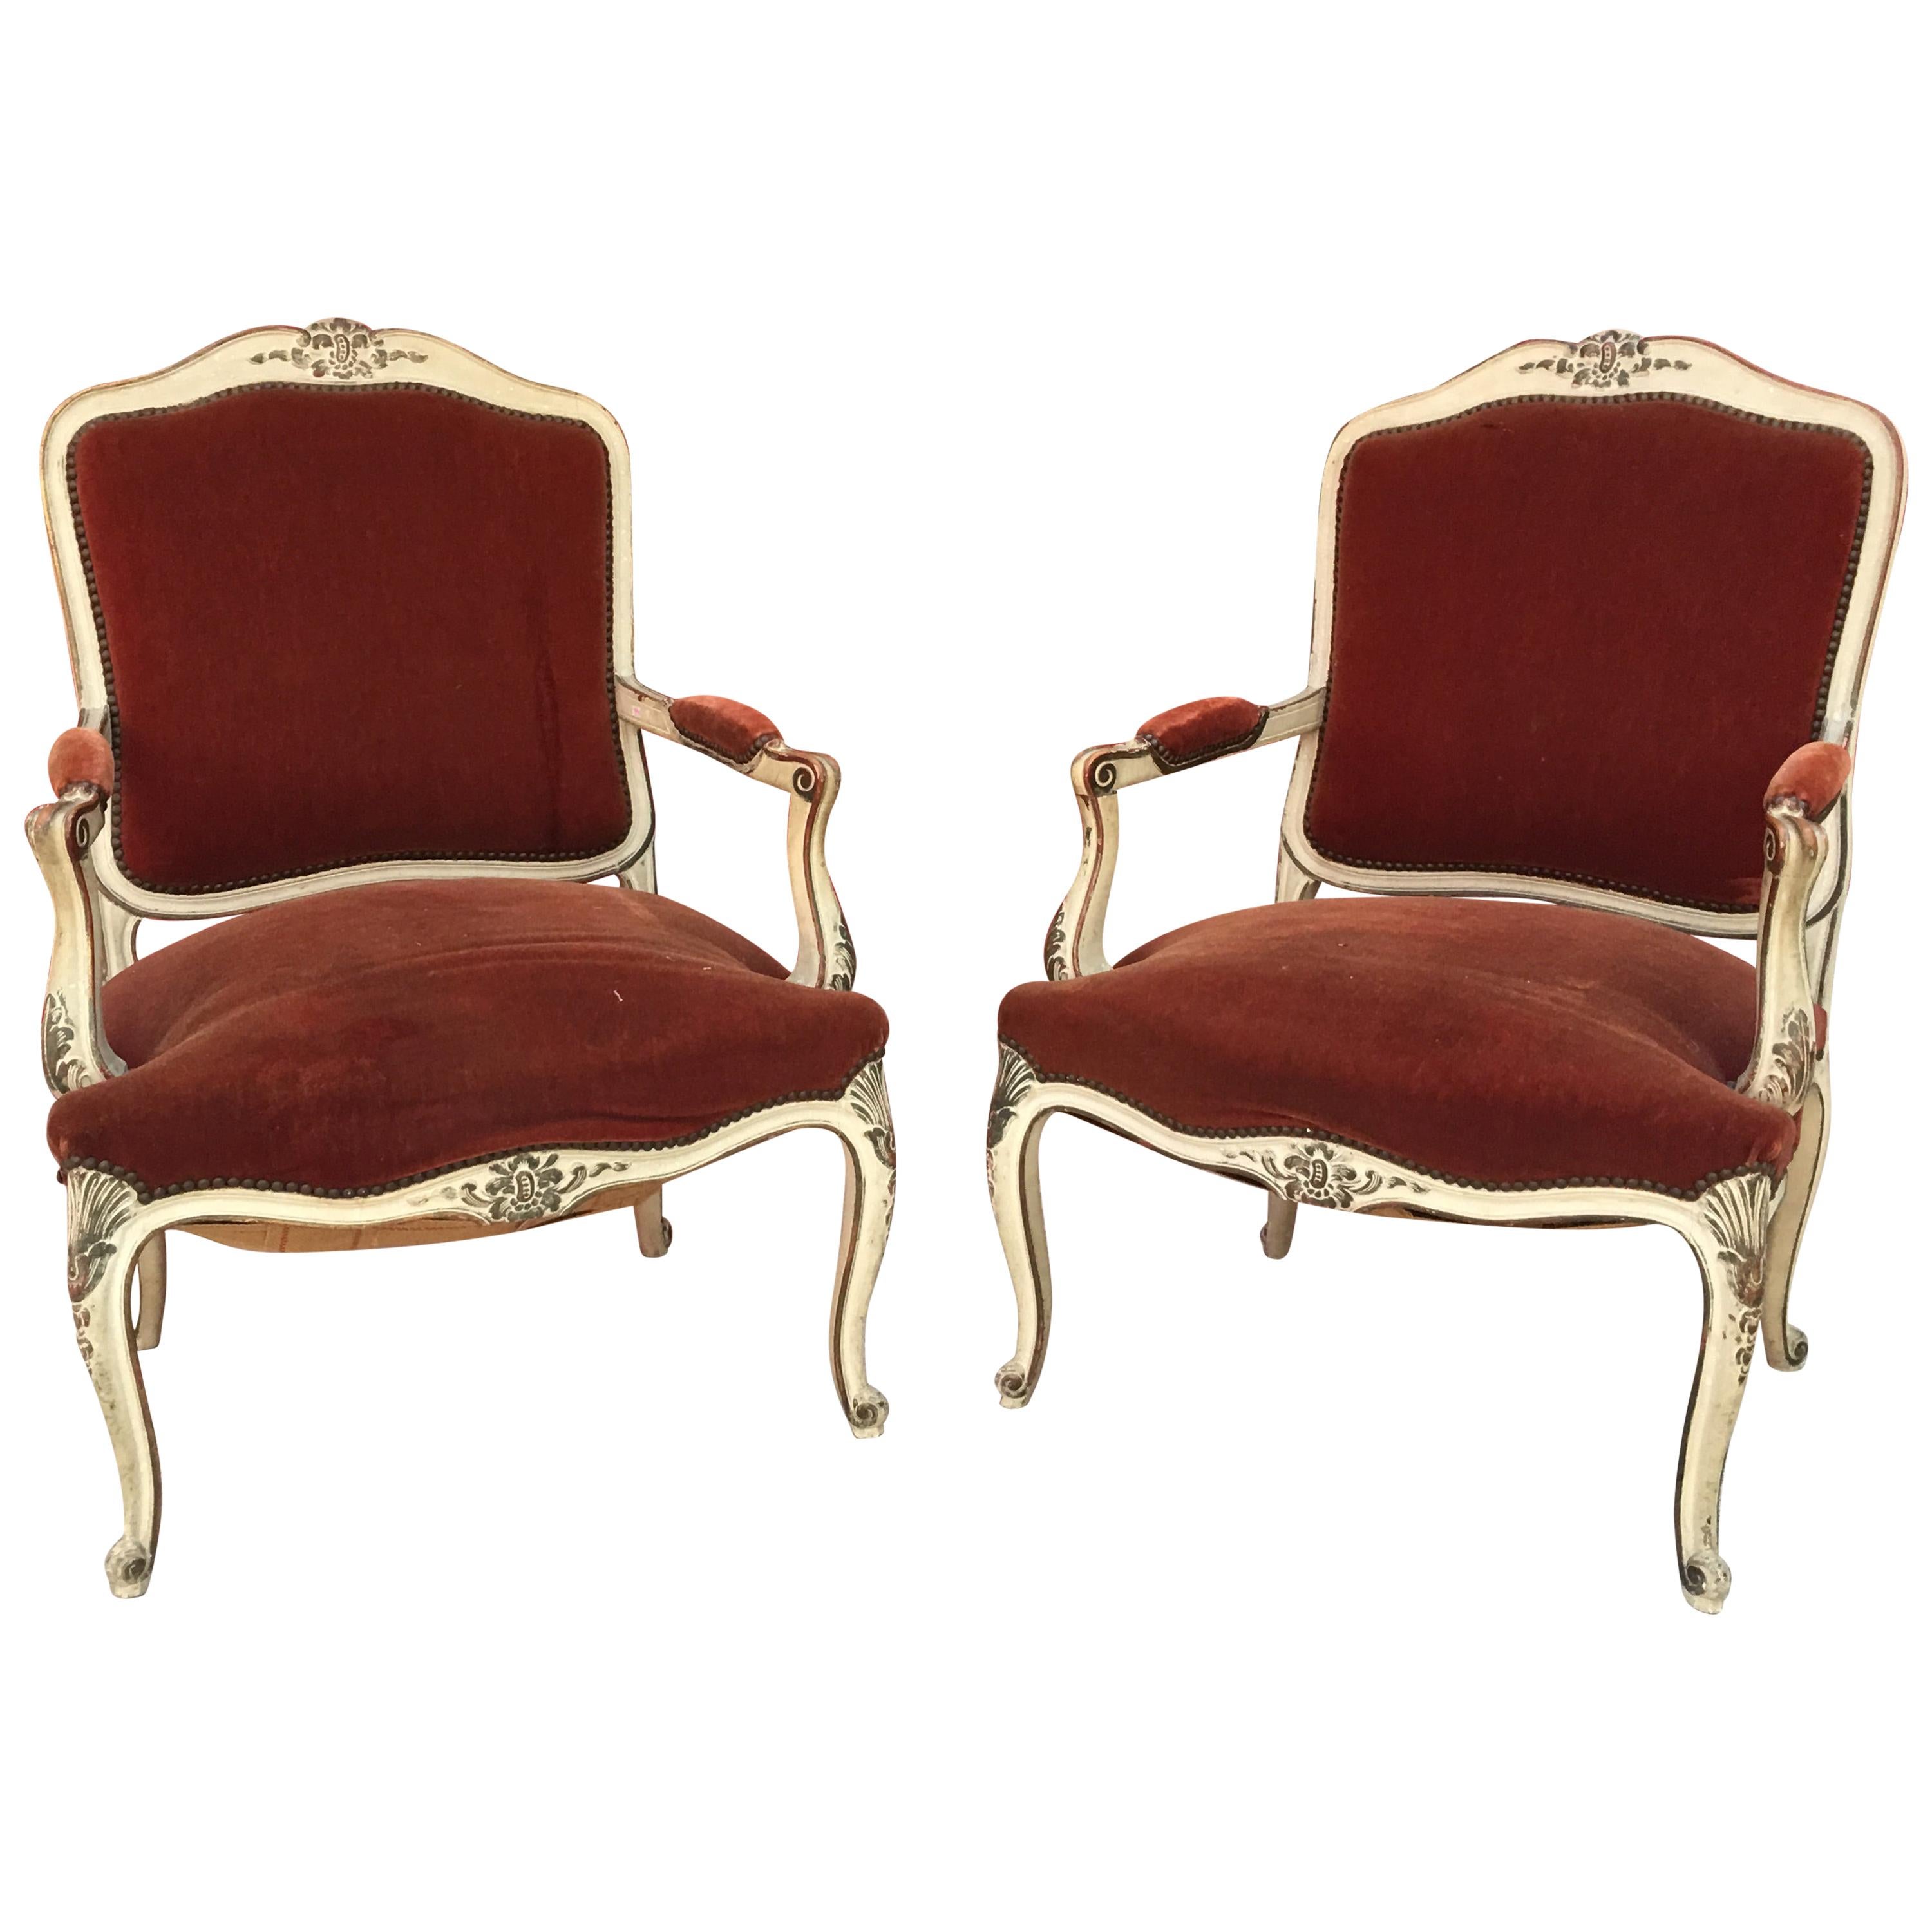 Pair of Patinated Armchairs, Louis XV Style, circa 1930-1950